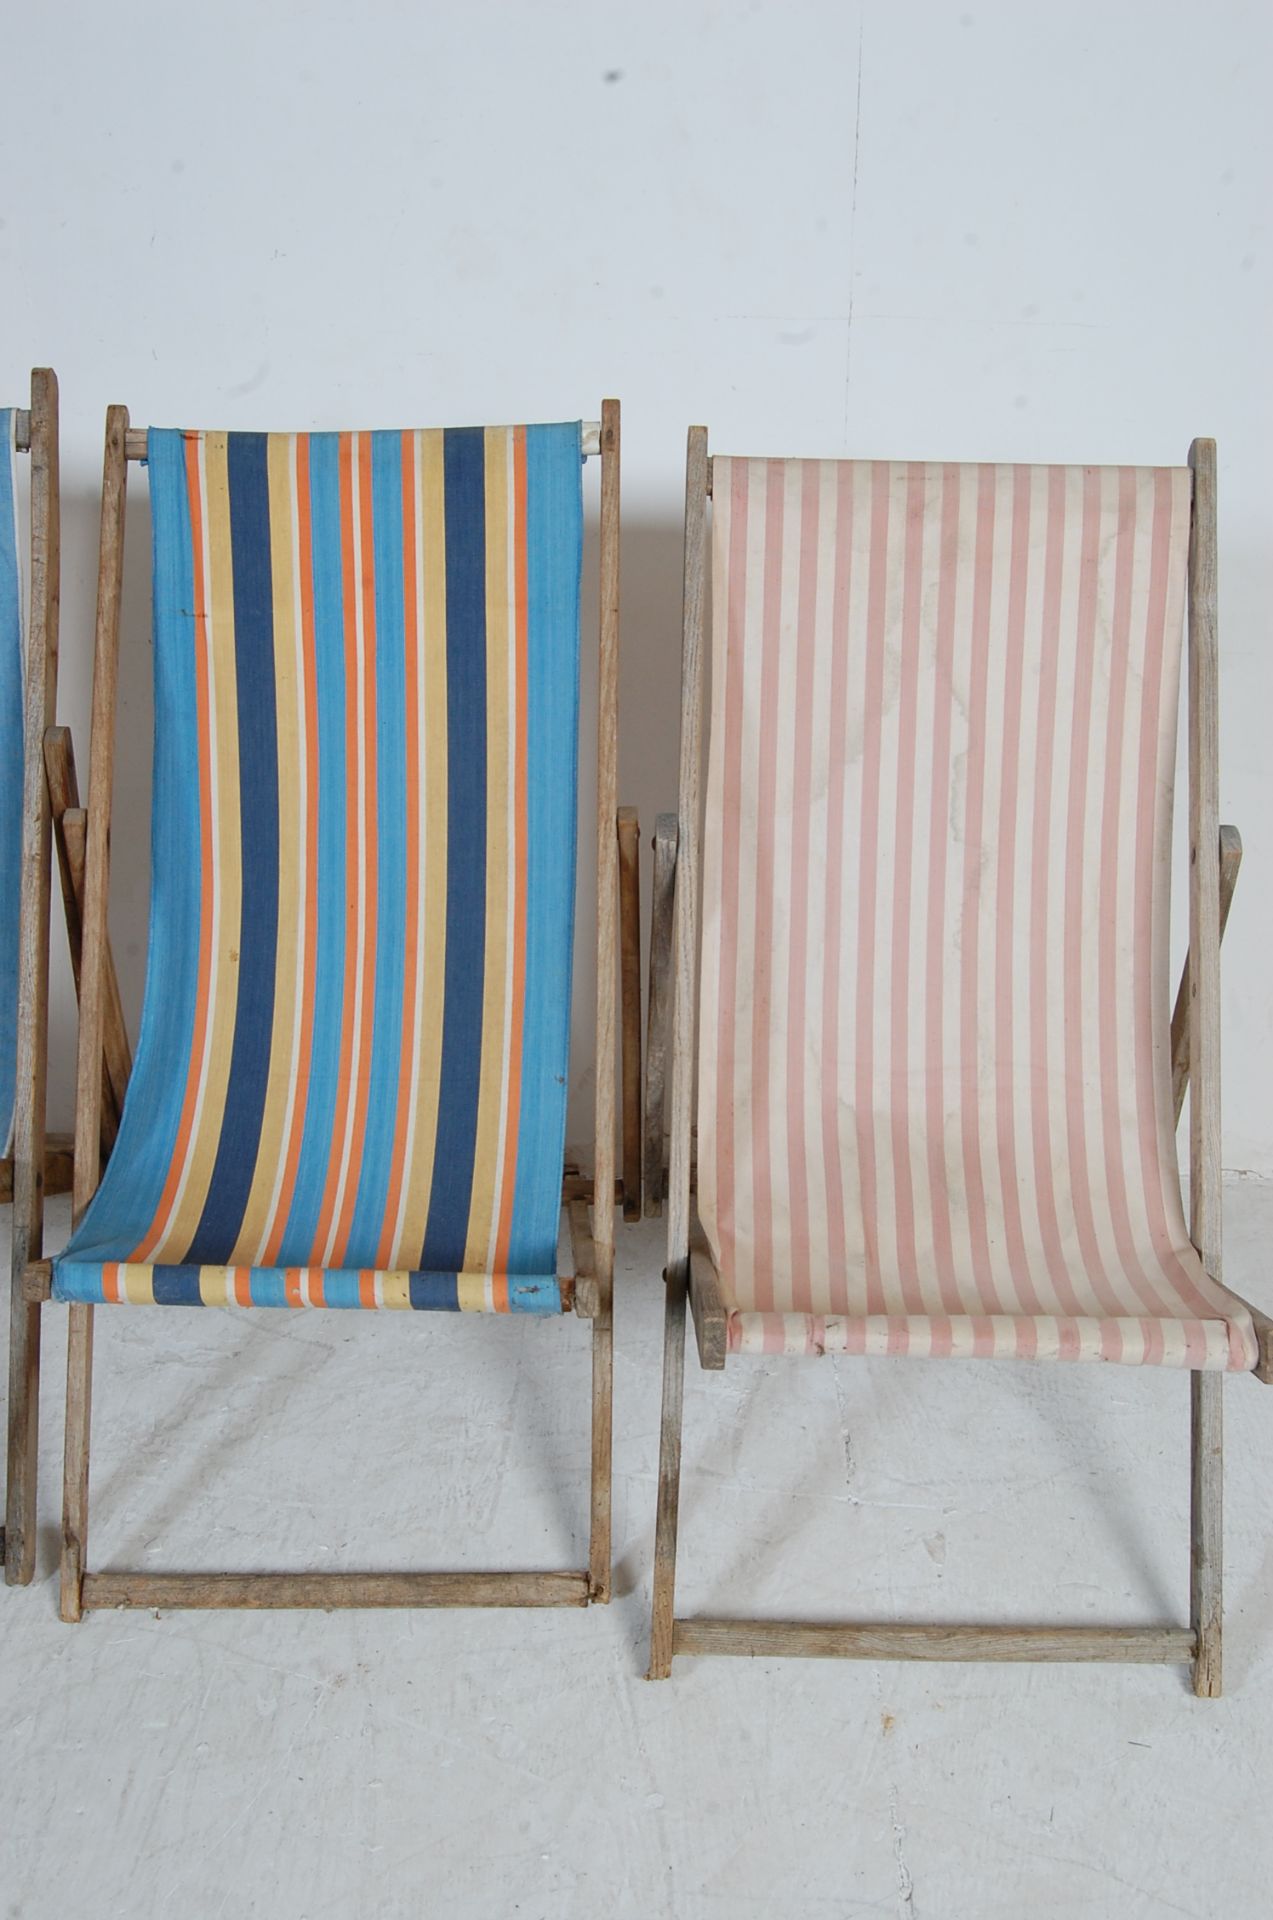 COLLECTION OF FOUR VINTAGE FOLDING DECK CHAIRS - Image 3 of 9